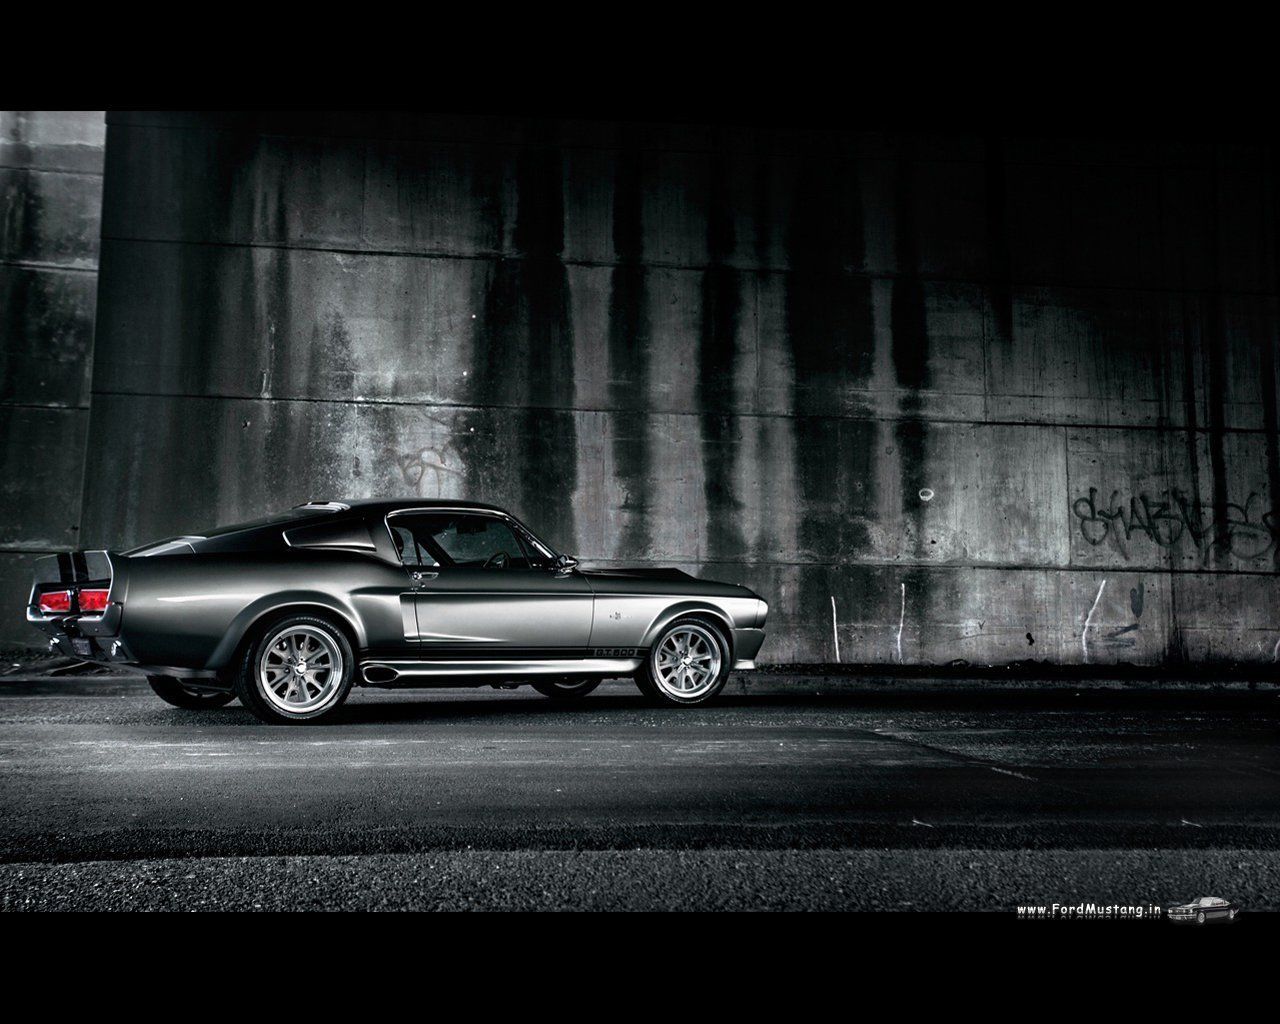 2015 Ford Mustang Shelby GT500 - image